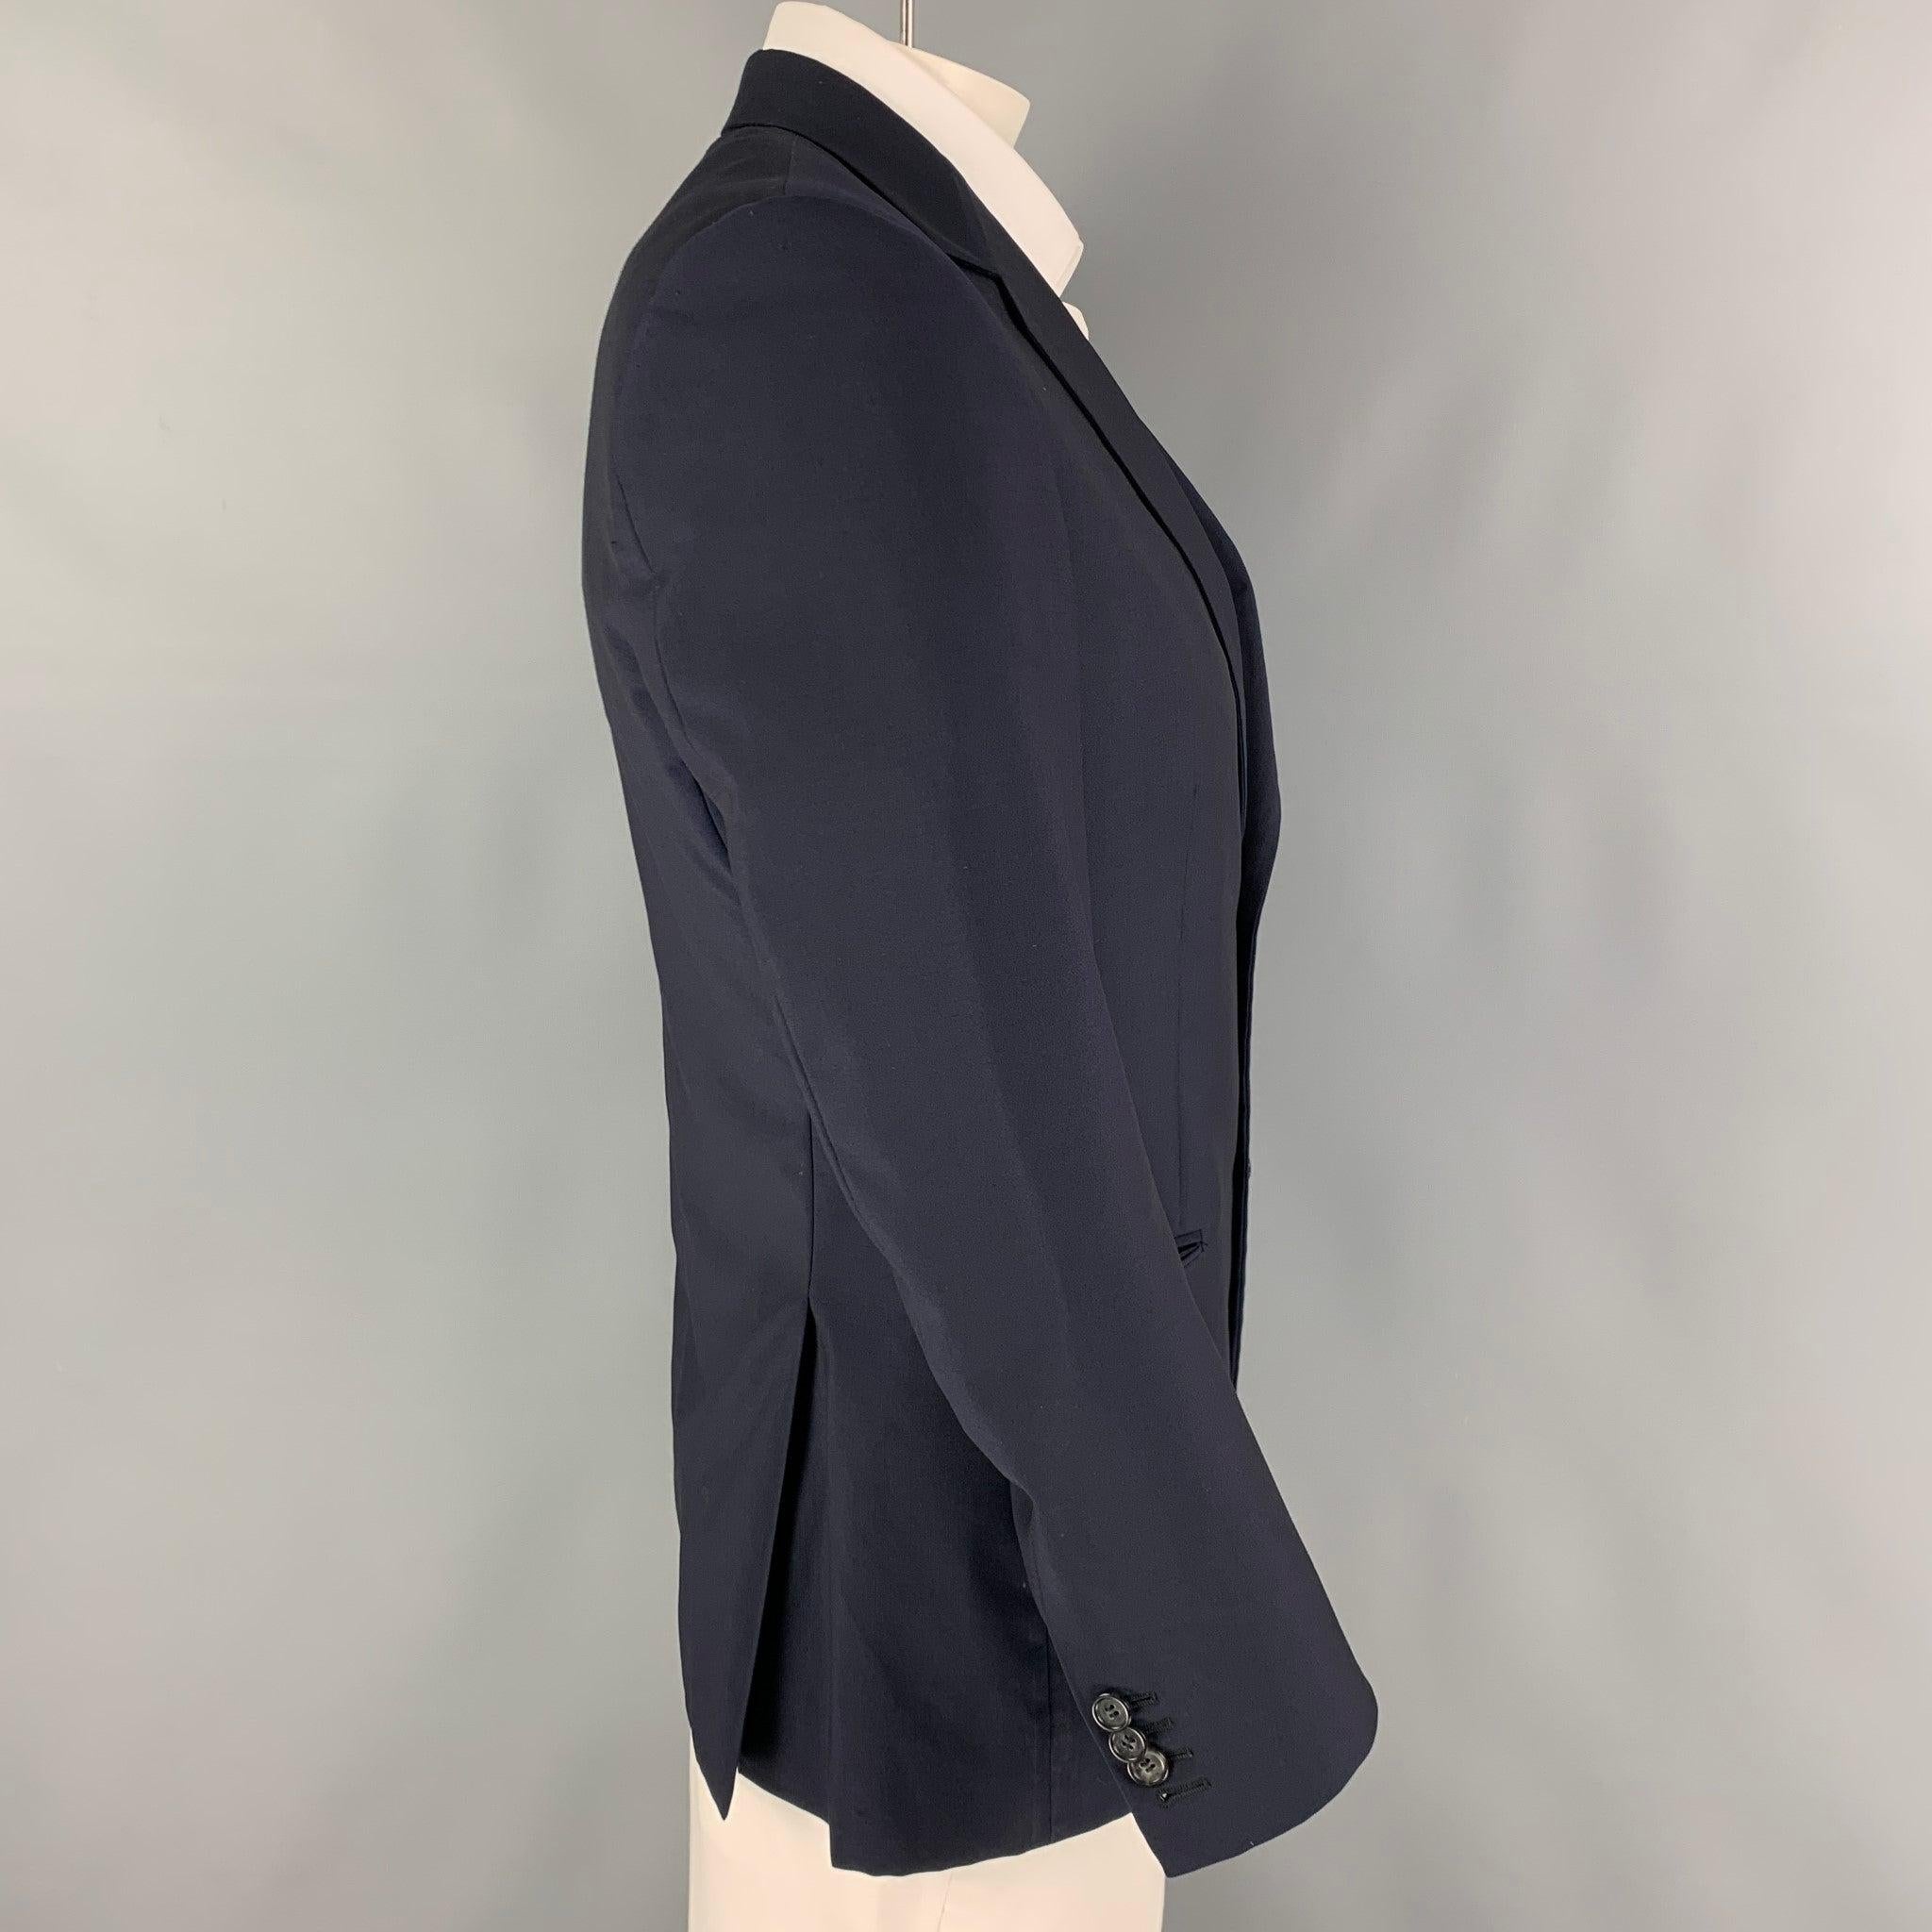 PRADA sport coat comes in a navy / wool with a full liner featuring a notch lapel, flap pockets, double back vent, and a double button closure.
Excellent
Pre-Owned Condition. 

Marked:   52 

Measurements: 
 
Shoulder: 18 inches Chest: 40 inches